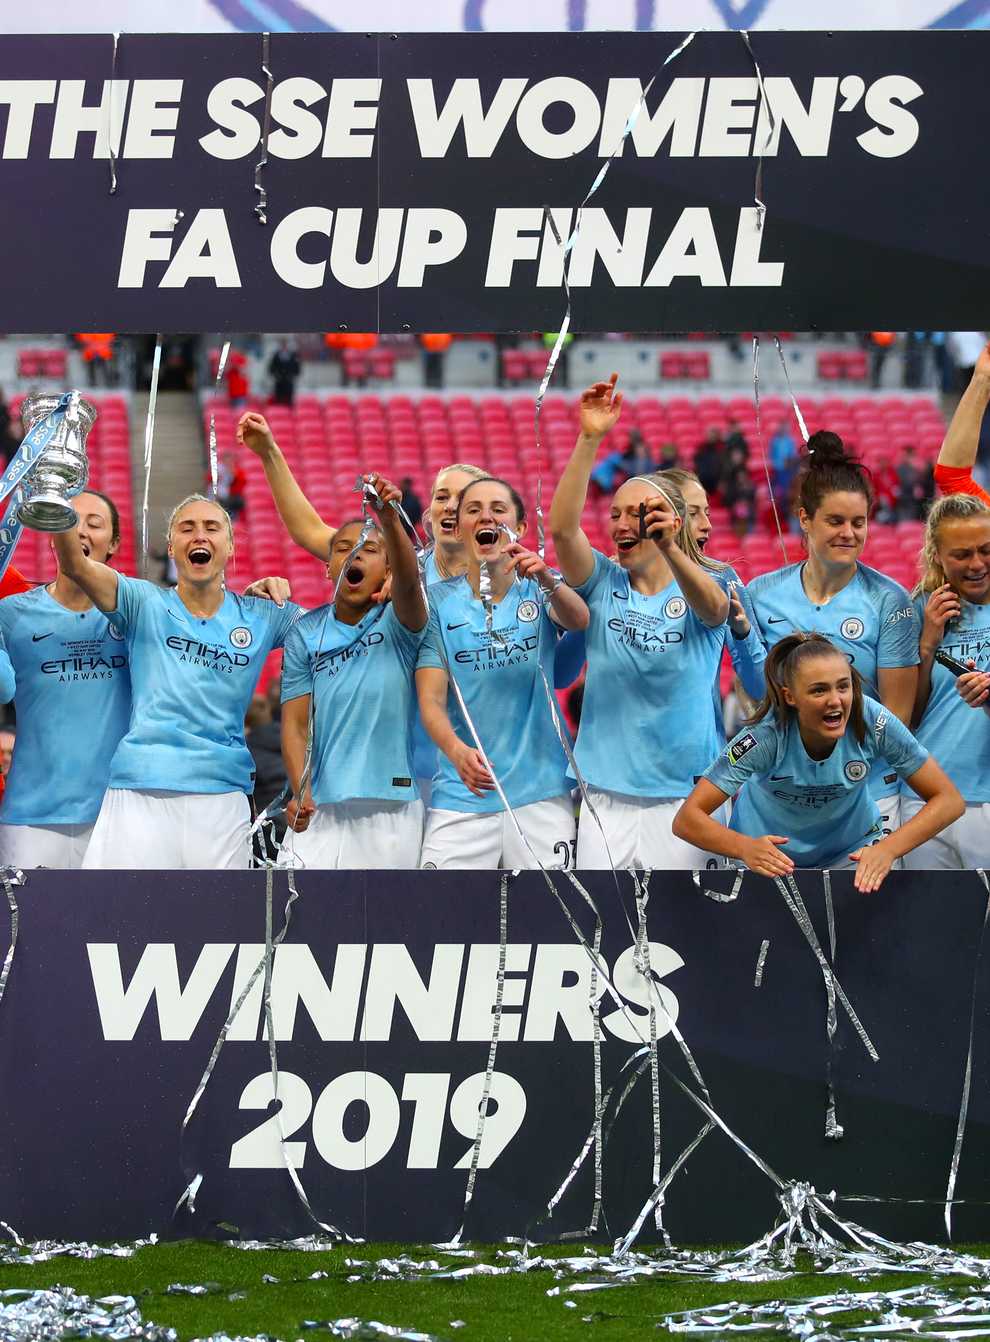 Manchester City are the current holders of the FA Cup